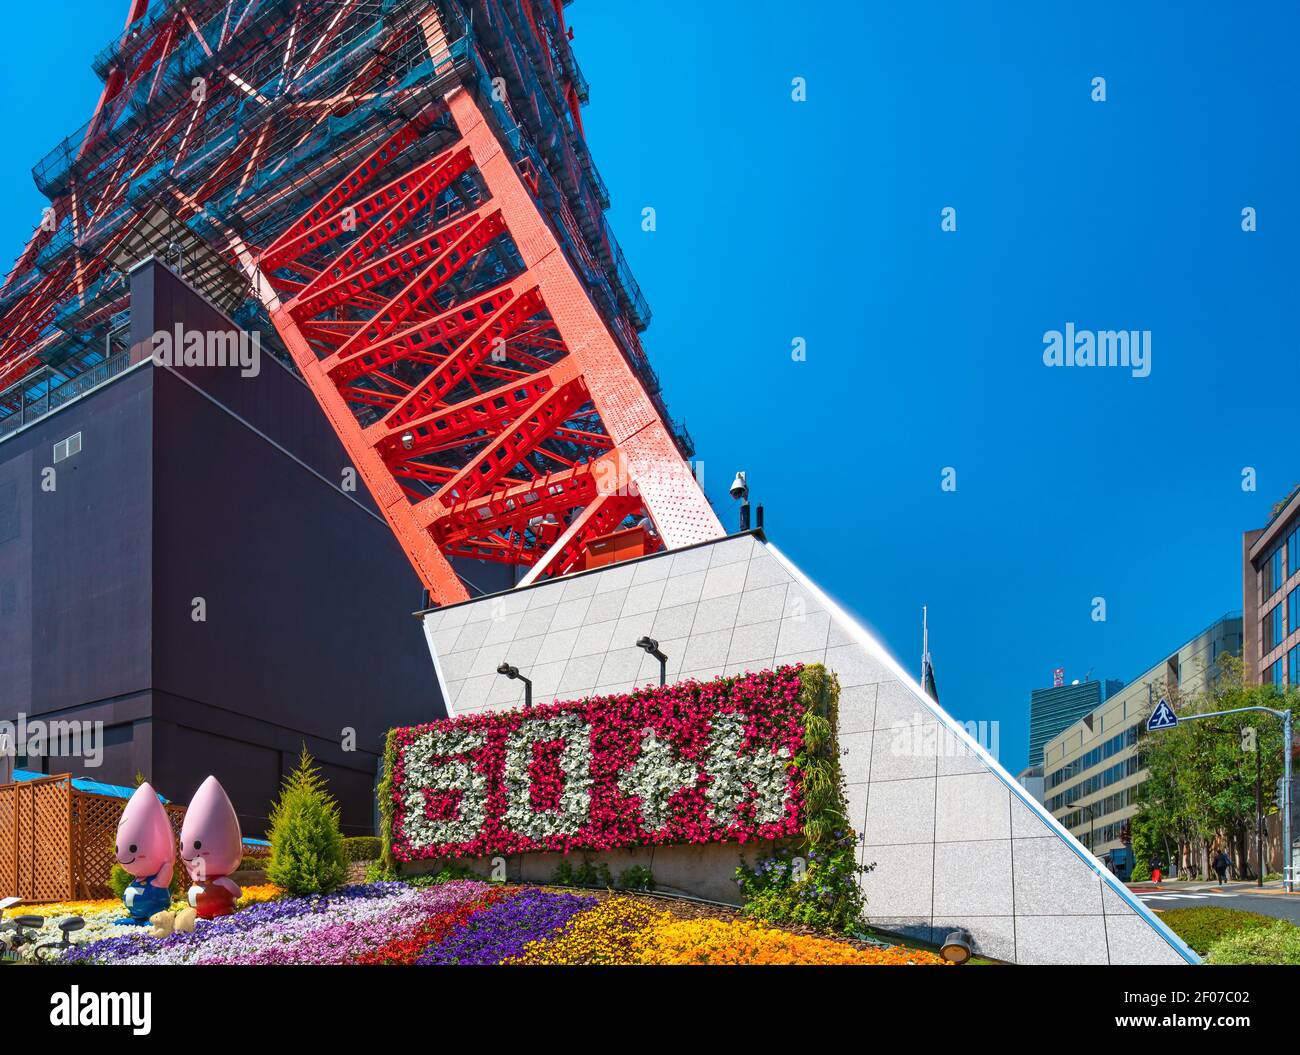 tokyo, japan - march 02 2021: Close up on the foot of the sightseeing landmark Tokyo tower adorned with colorful flowers and Noppon Brothers mascots f Stock Photo